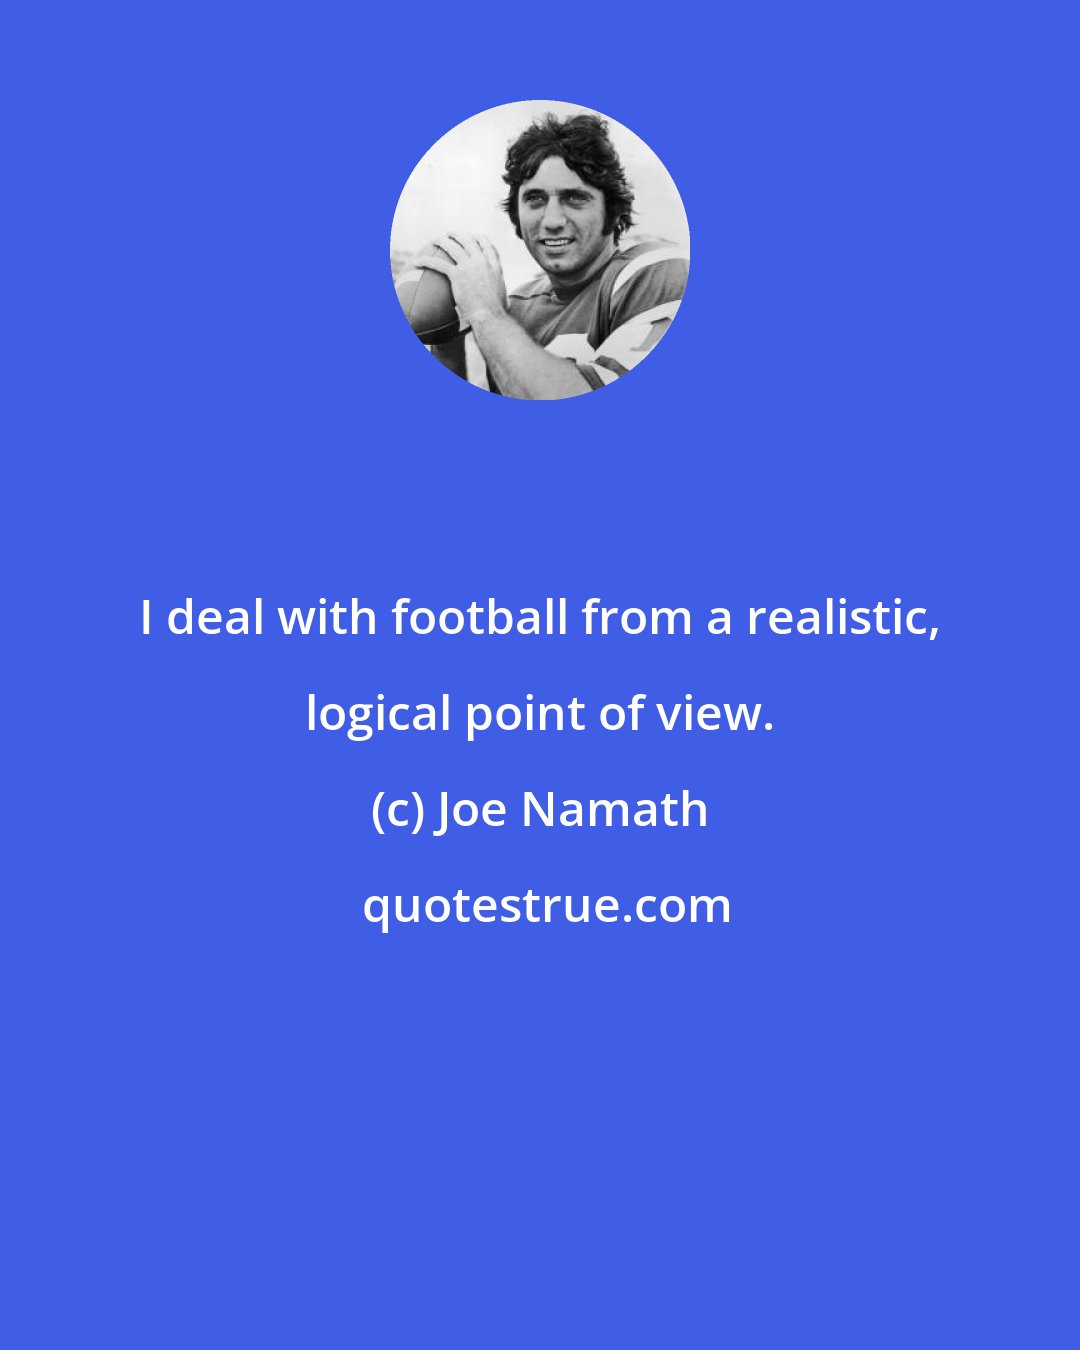 Joe Namath: I deal with football from a realistic, logical point of view.